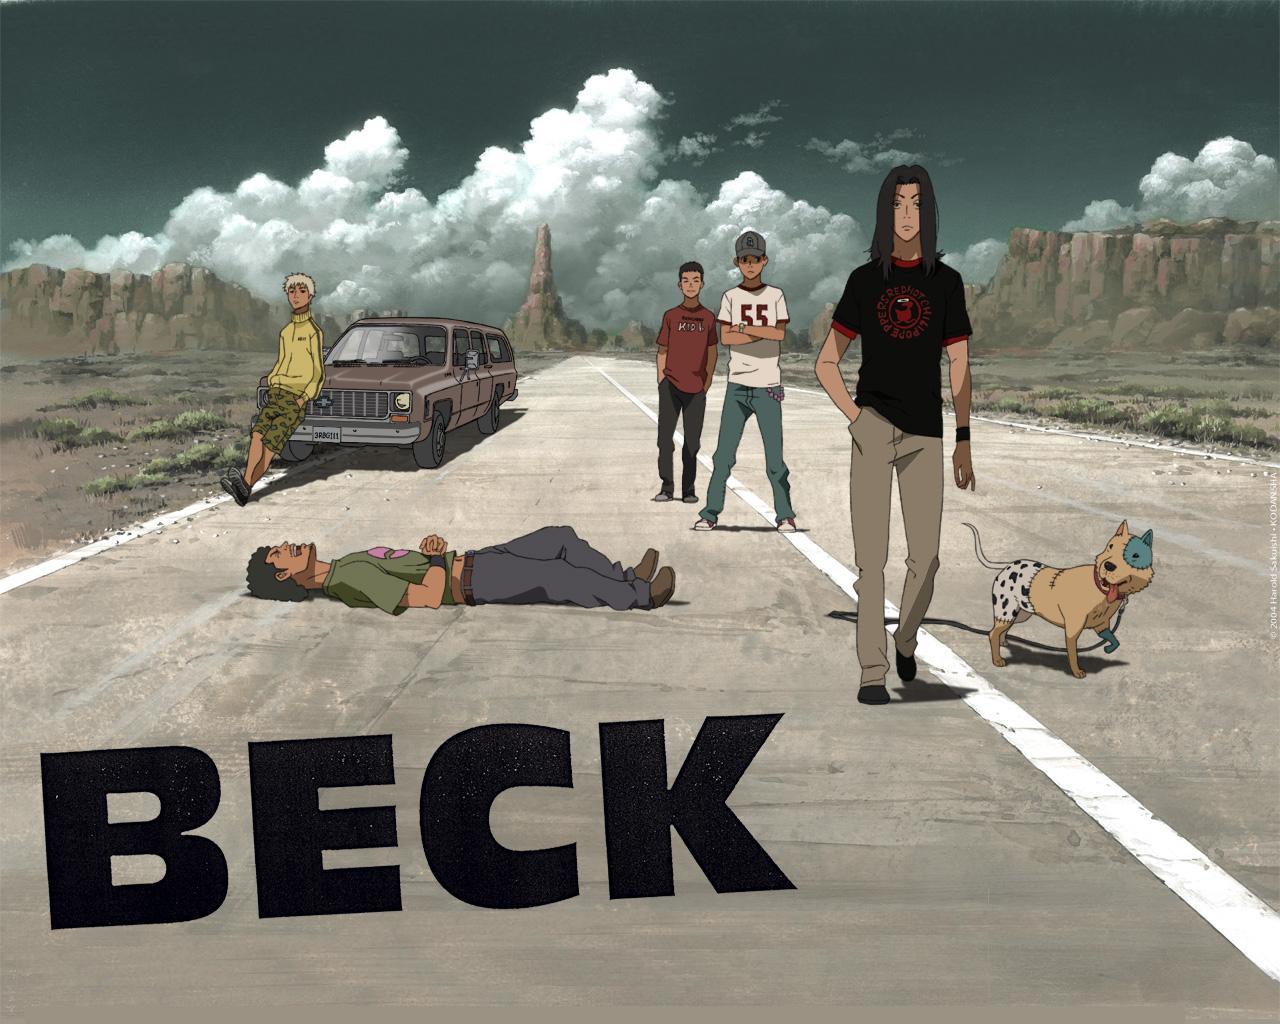 Beck Live Action Sub Indo